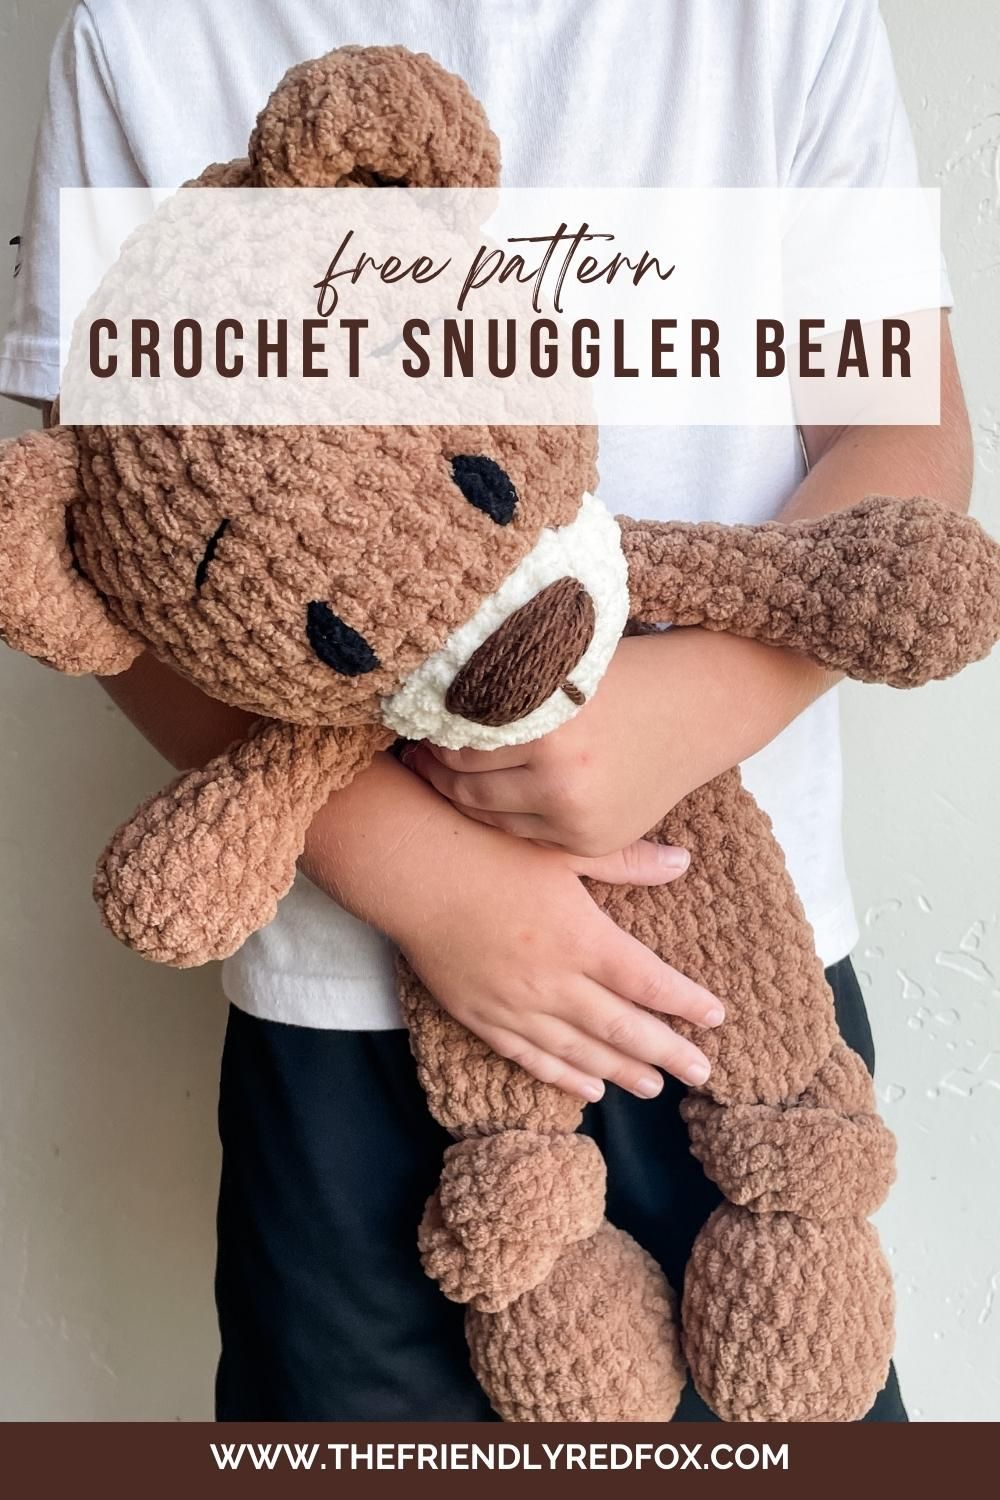 This cozy free crochet snuggler pattern is a spin on the classic bear! This crochet snuggler bear is a half stuffy, half lovey- the perfect baby or toddler gift!